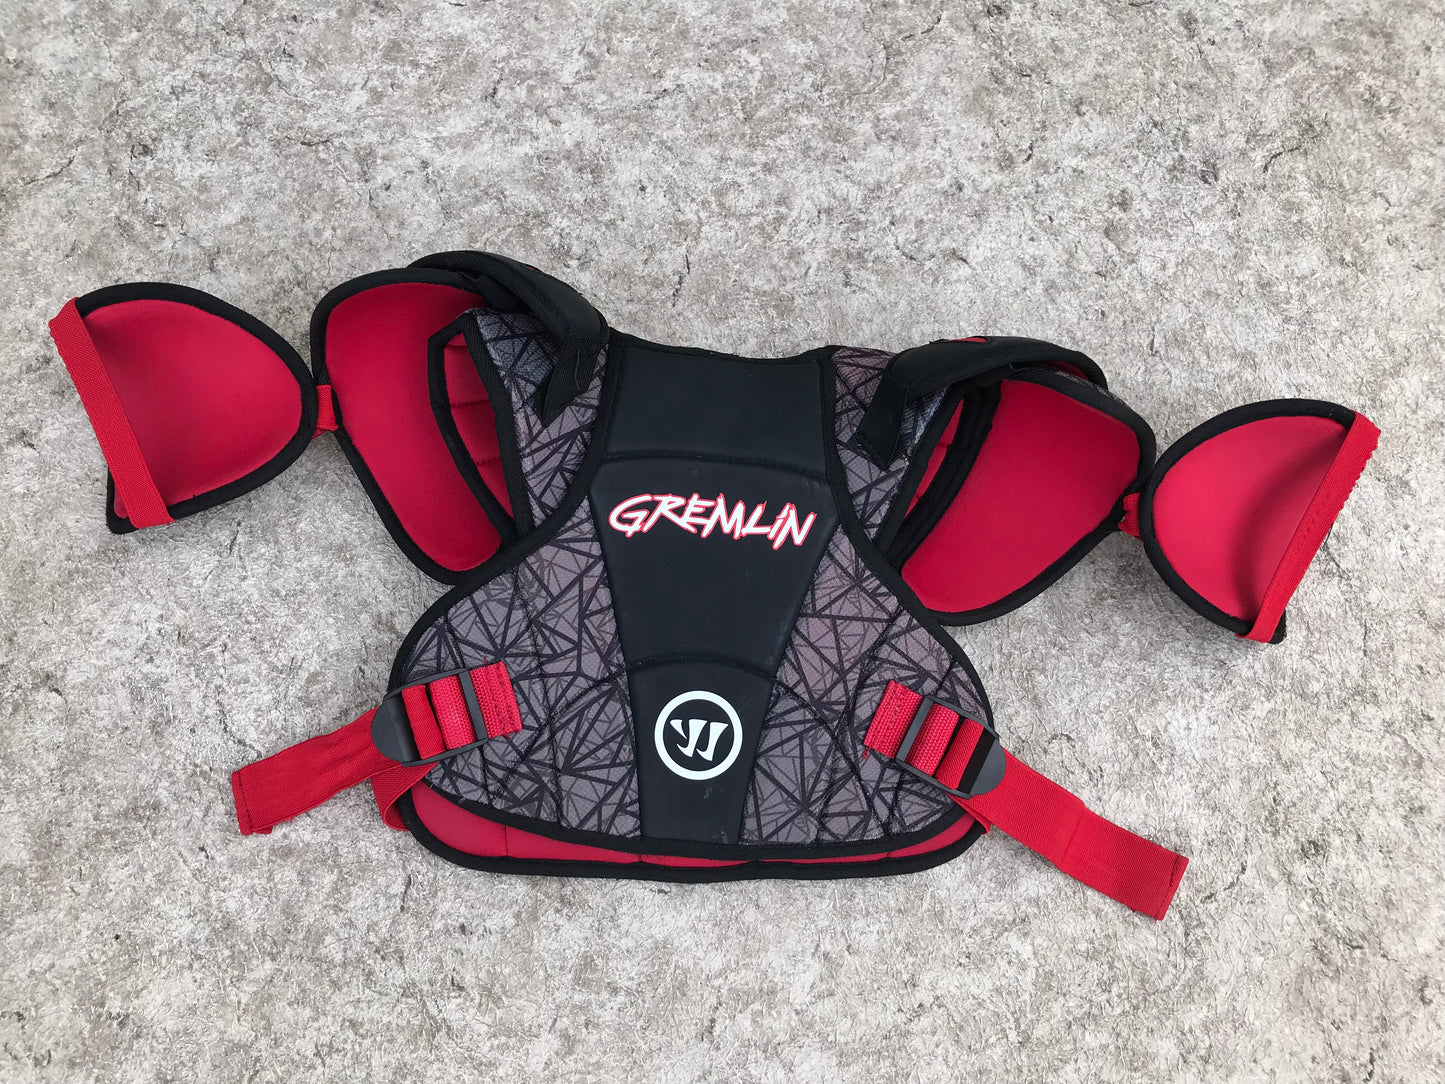 Lacrosse Chest Pad Child Size Y Small Age 5-7 Warrior Gremlins Red Black Excellent PT 3440